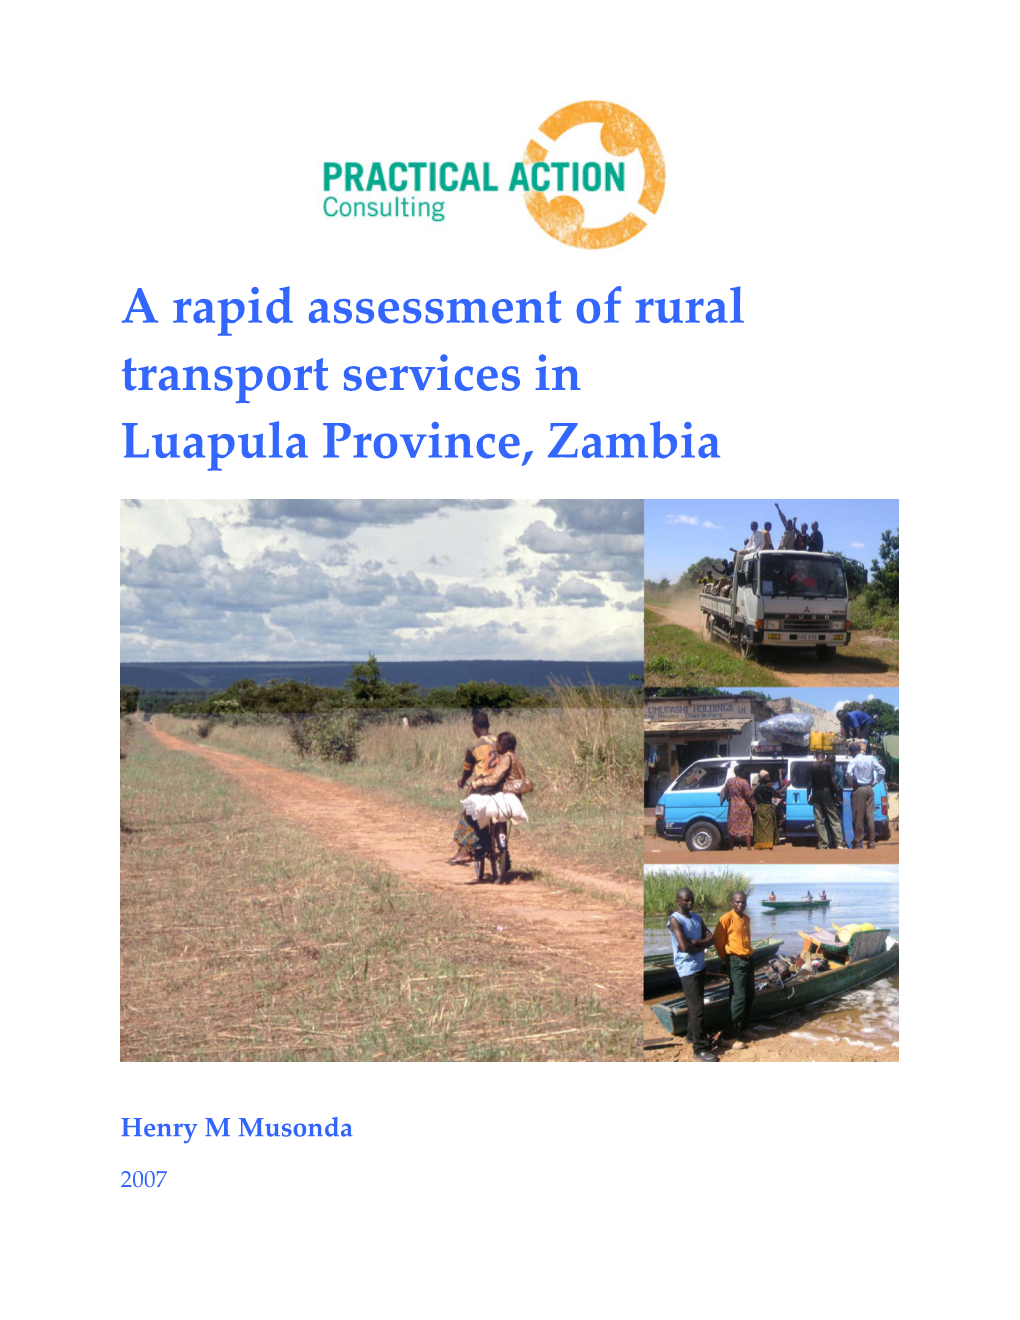 A Rapid Assessment of Rural Transport Services in Luapula Province, Zambia